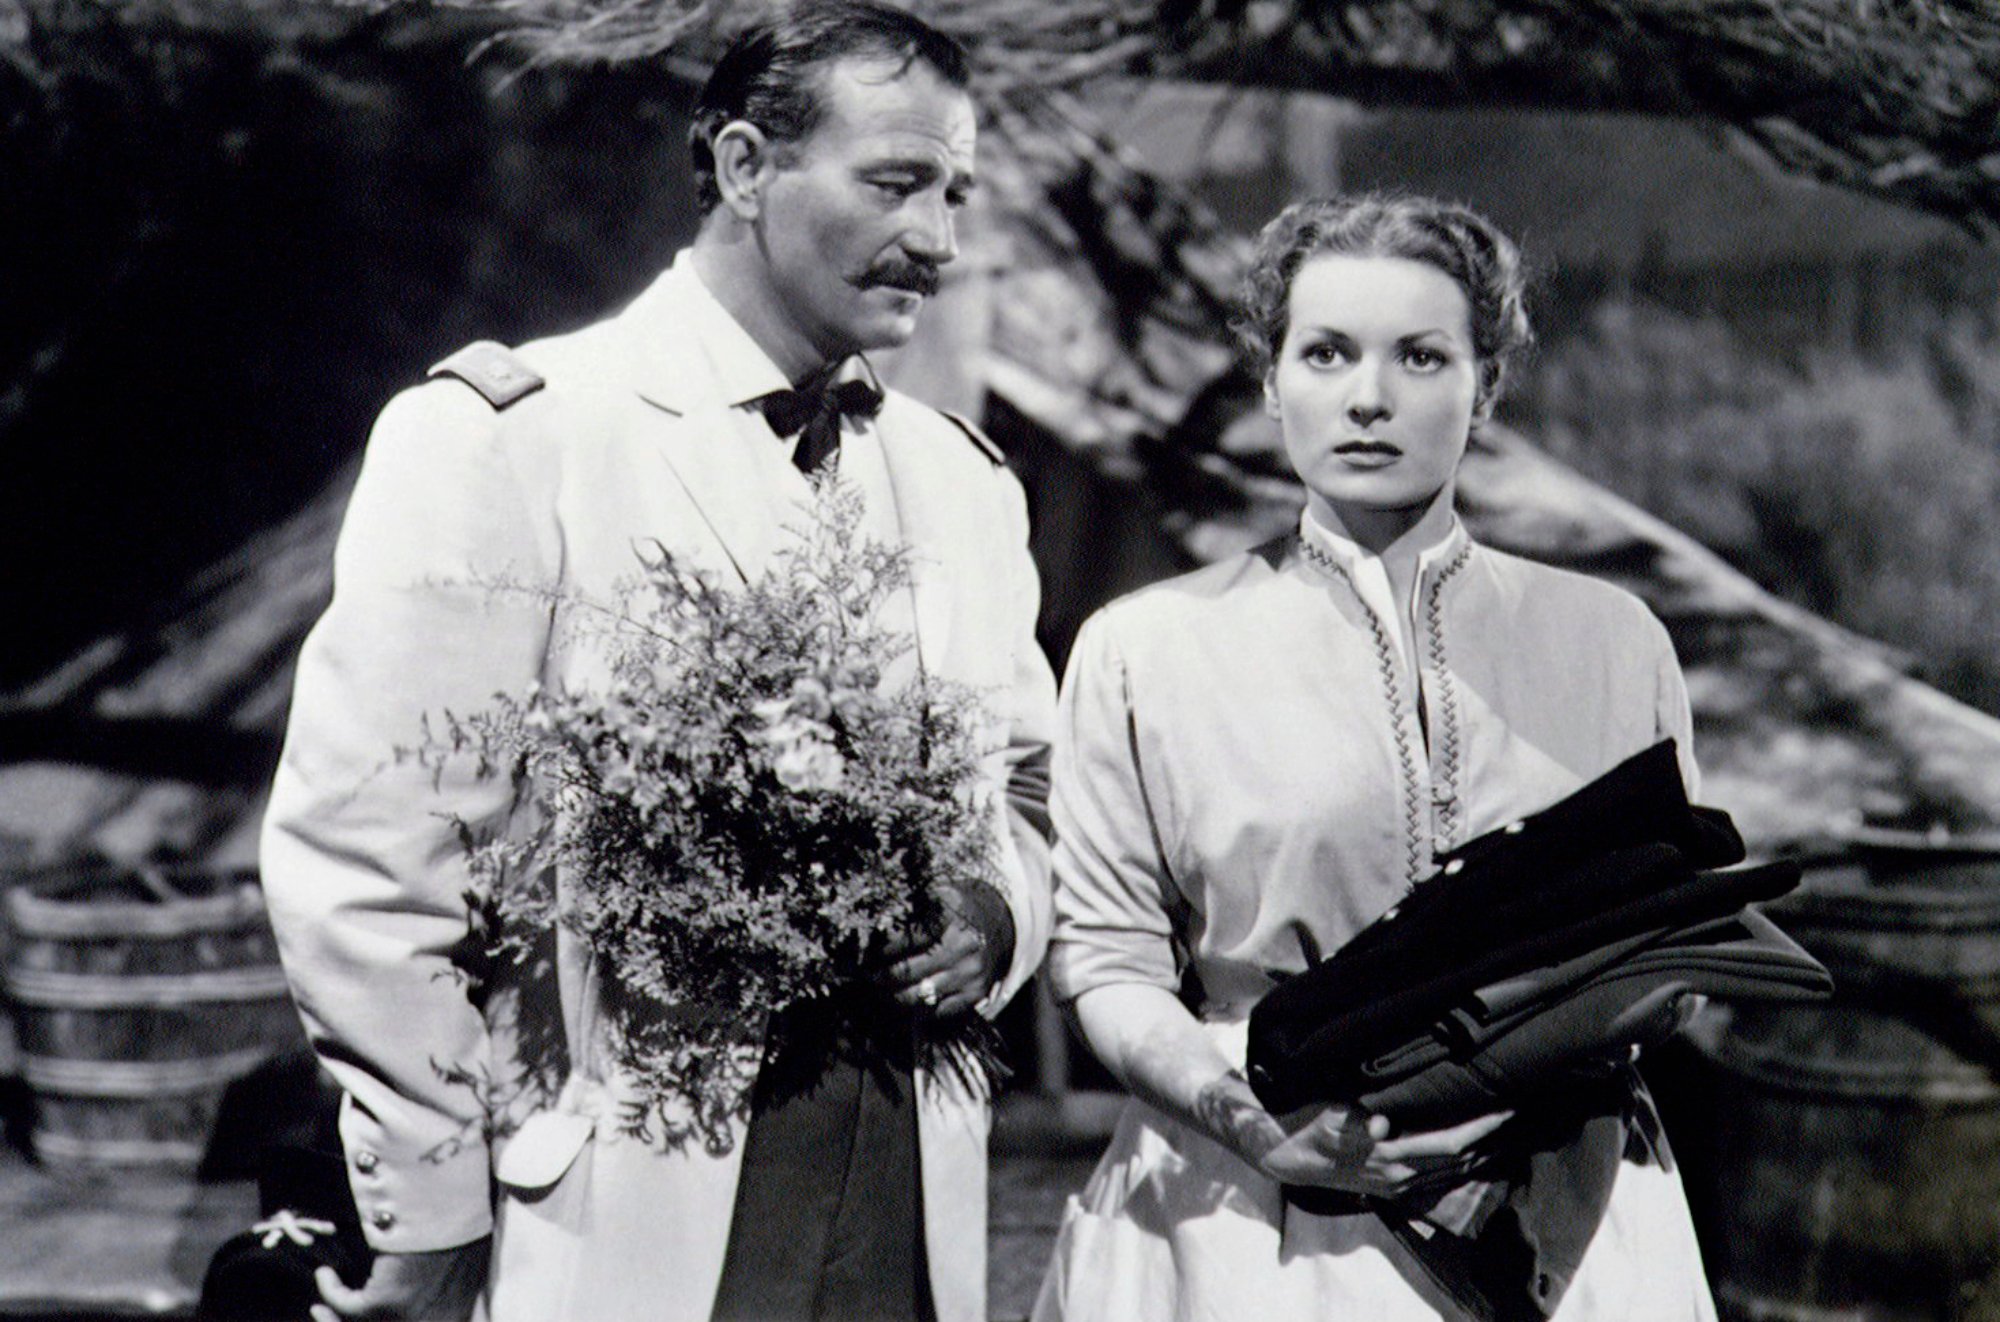 'Rio Grande' John Wayne as Lt. Col. Kirby Yorke and Maureen O'Hara as Mrs. Kathleen Yorke holding flowers and clothes with Wayne looking at O'Hara while she stares off